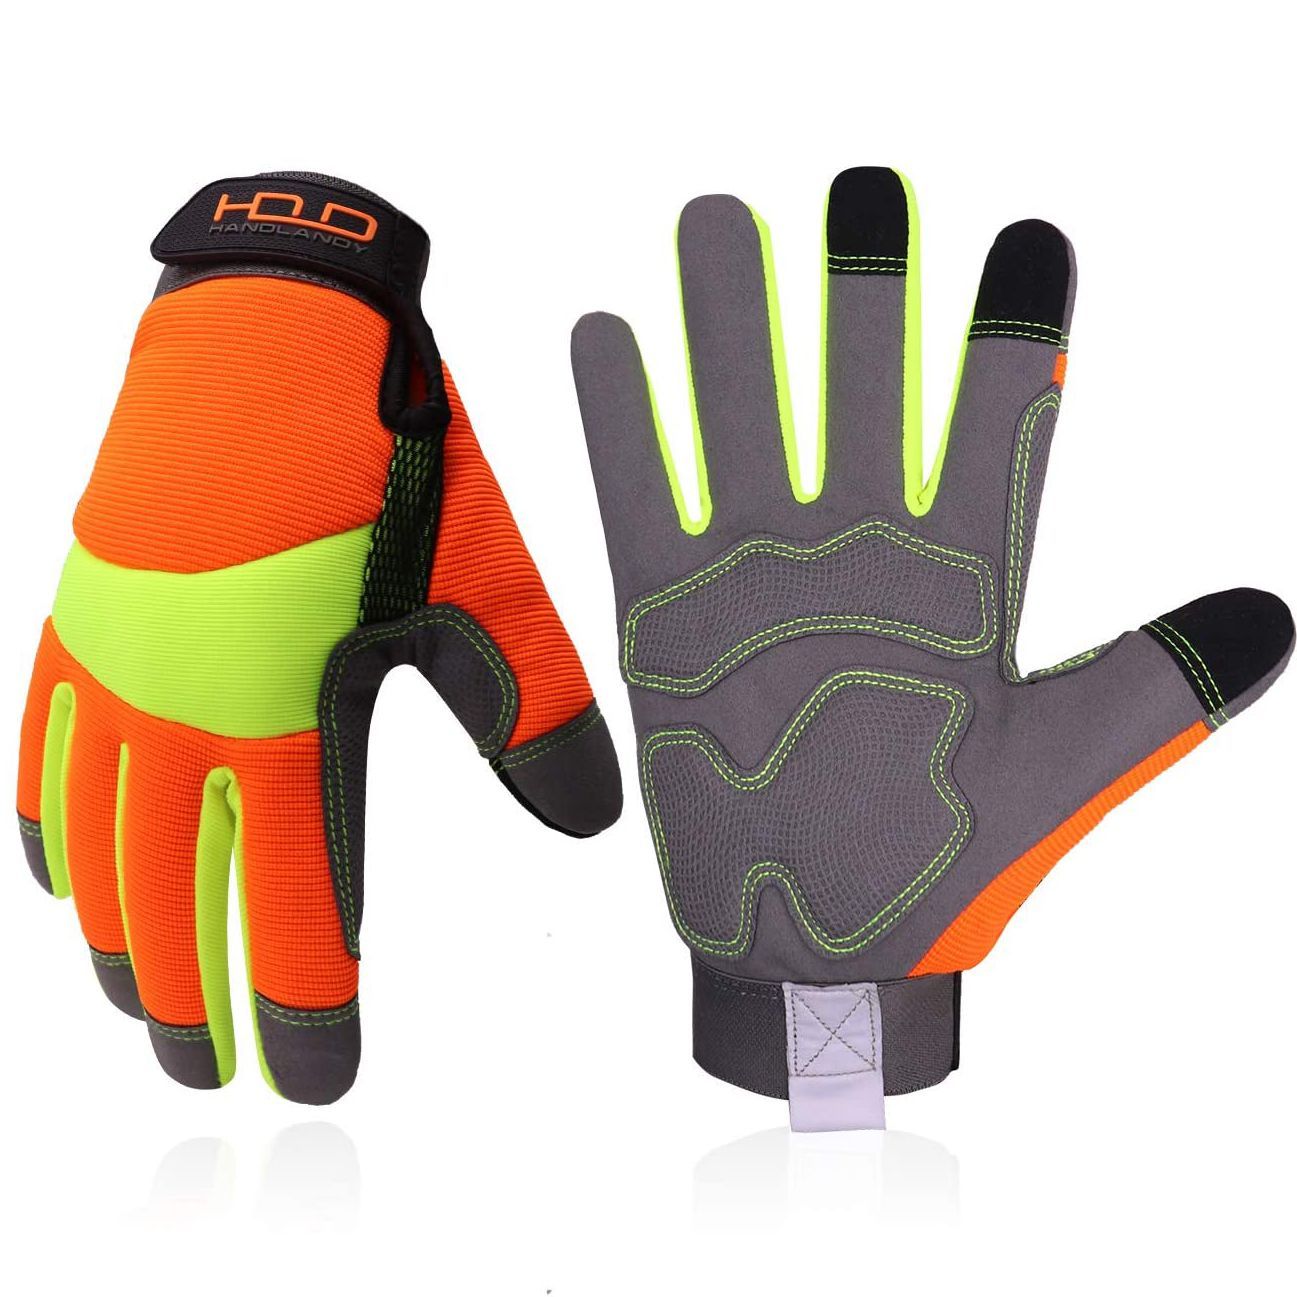 venstre tone Tag væk 10 Top-Rated Work Gloves for Any Type of Job